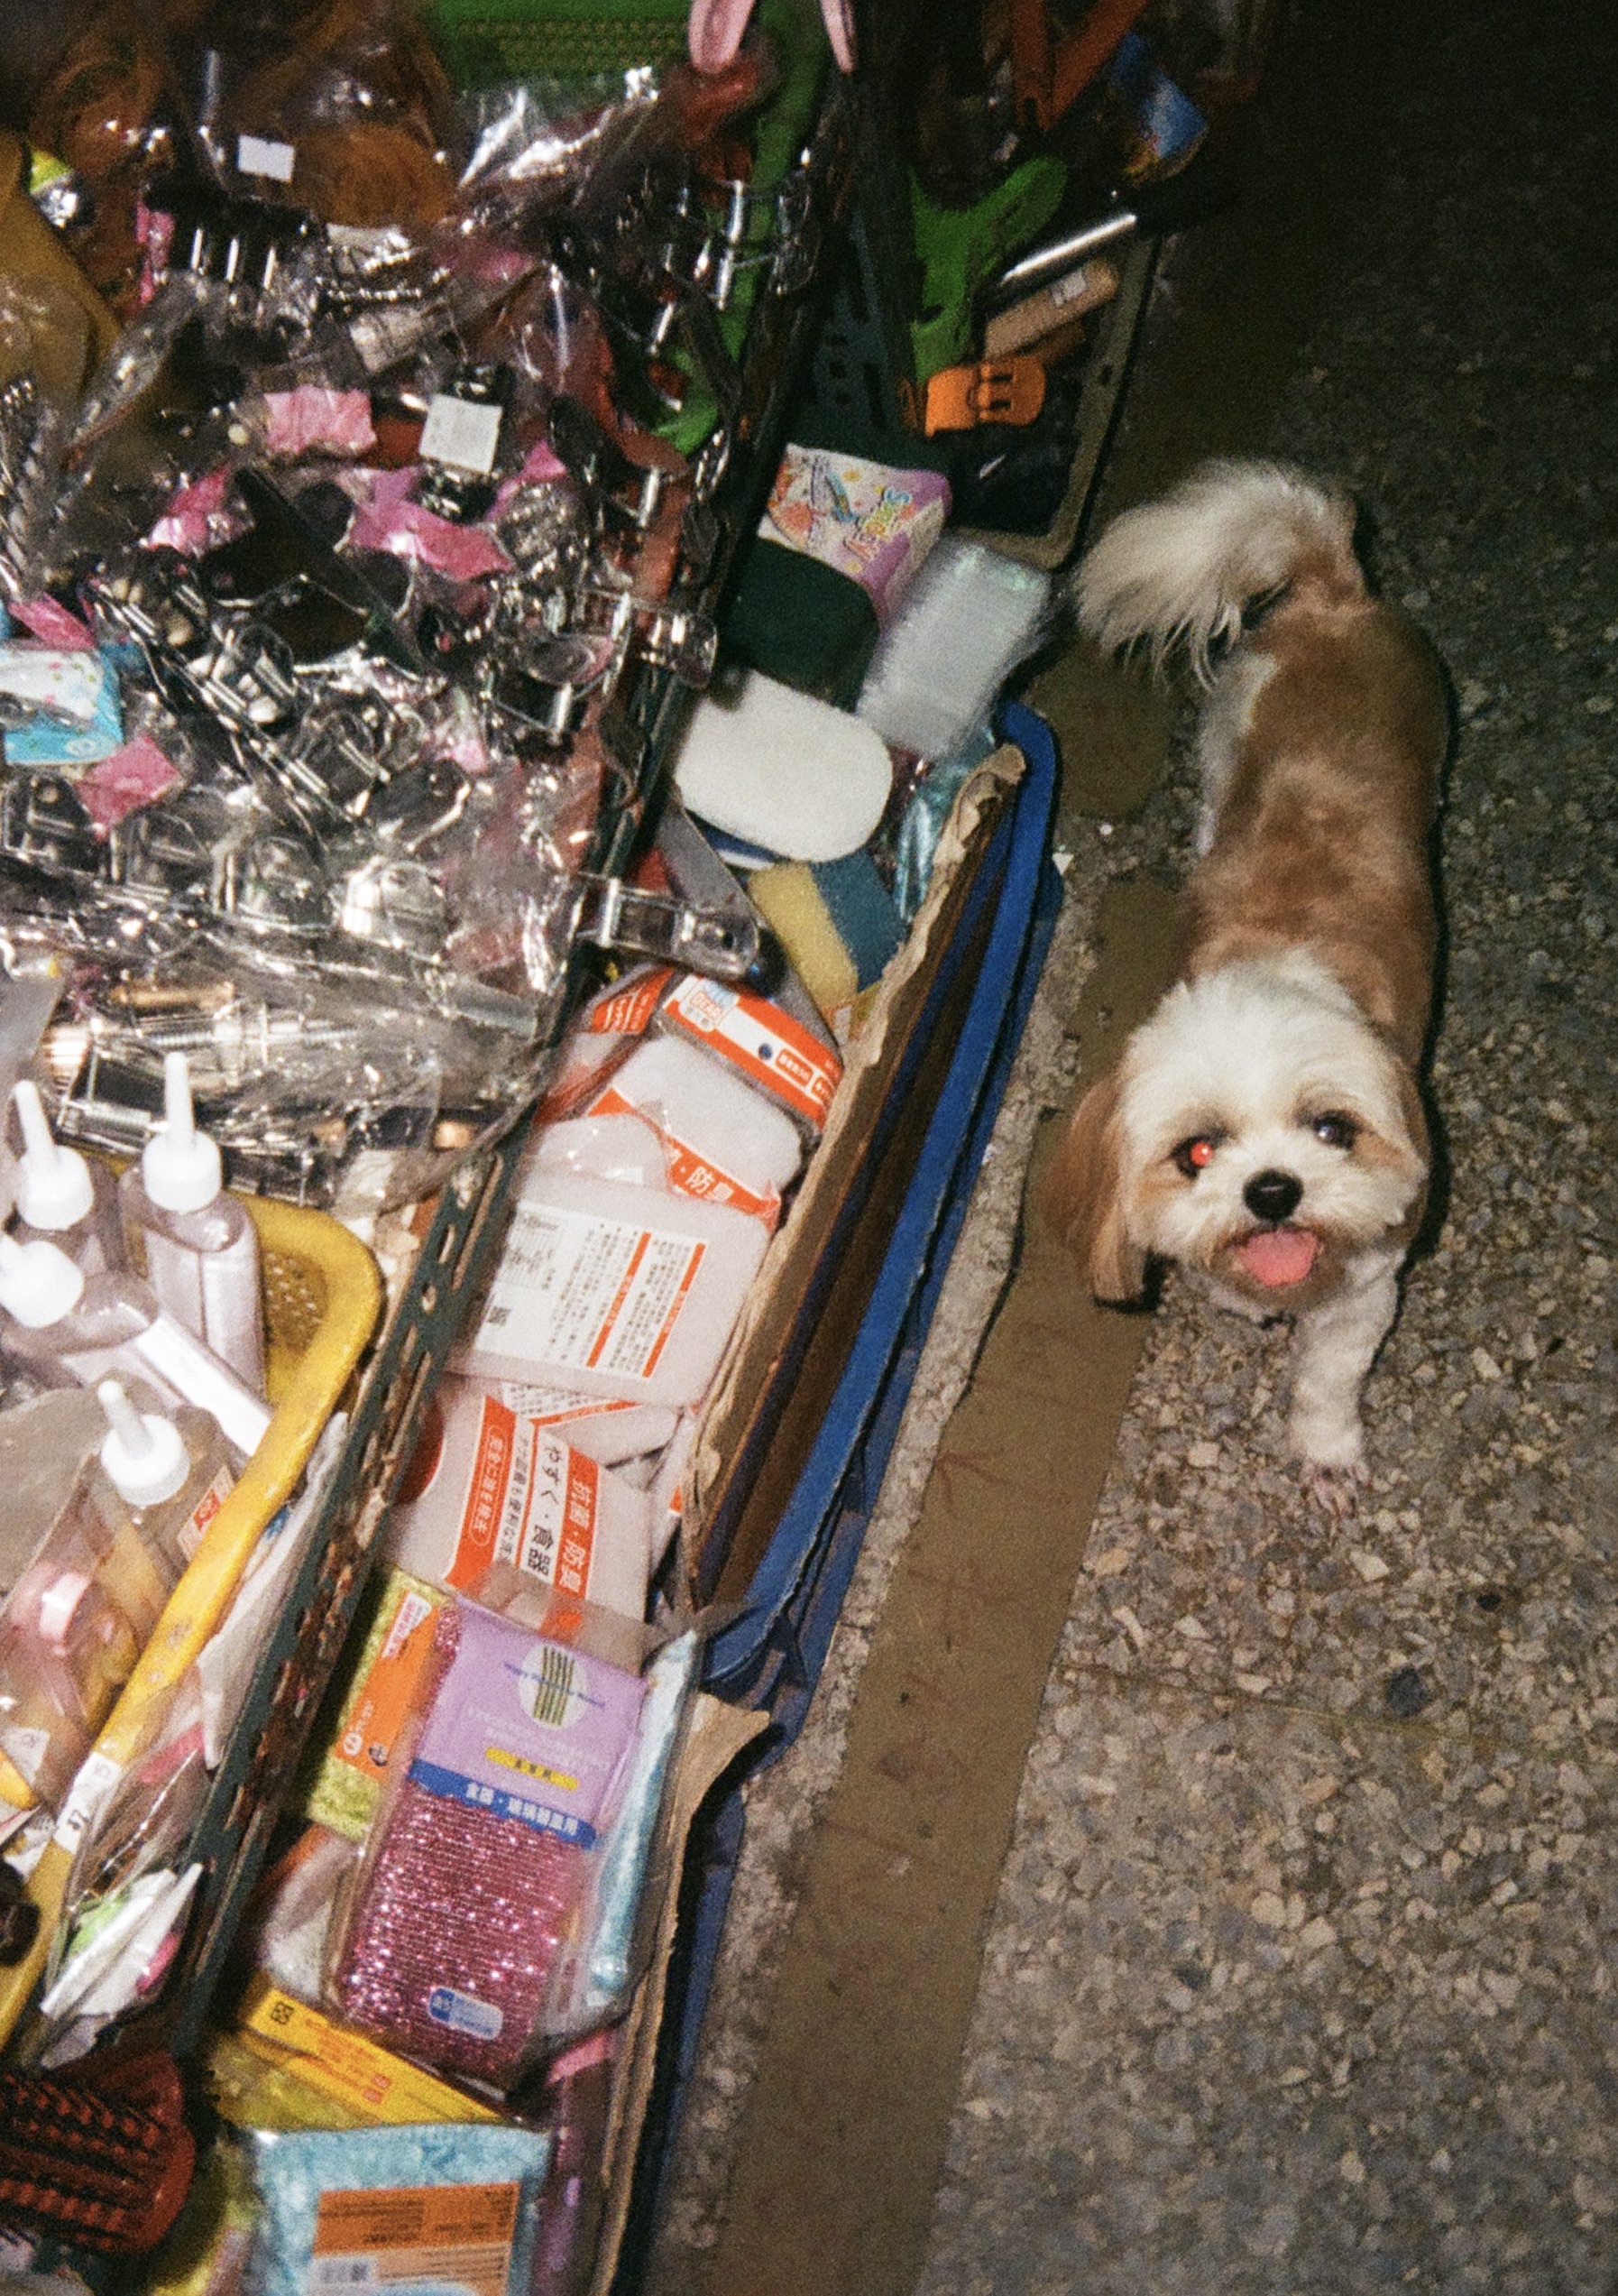 A dog with its tounge out in a grocery store